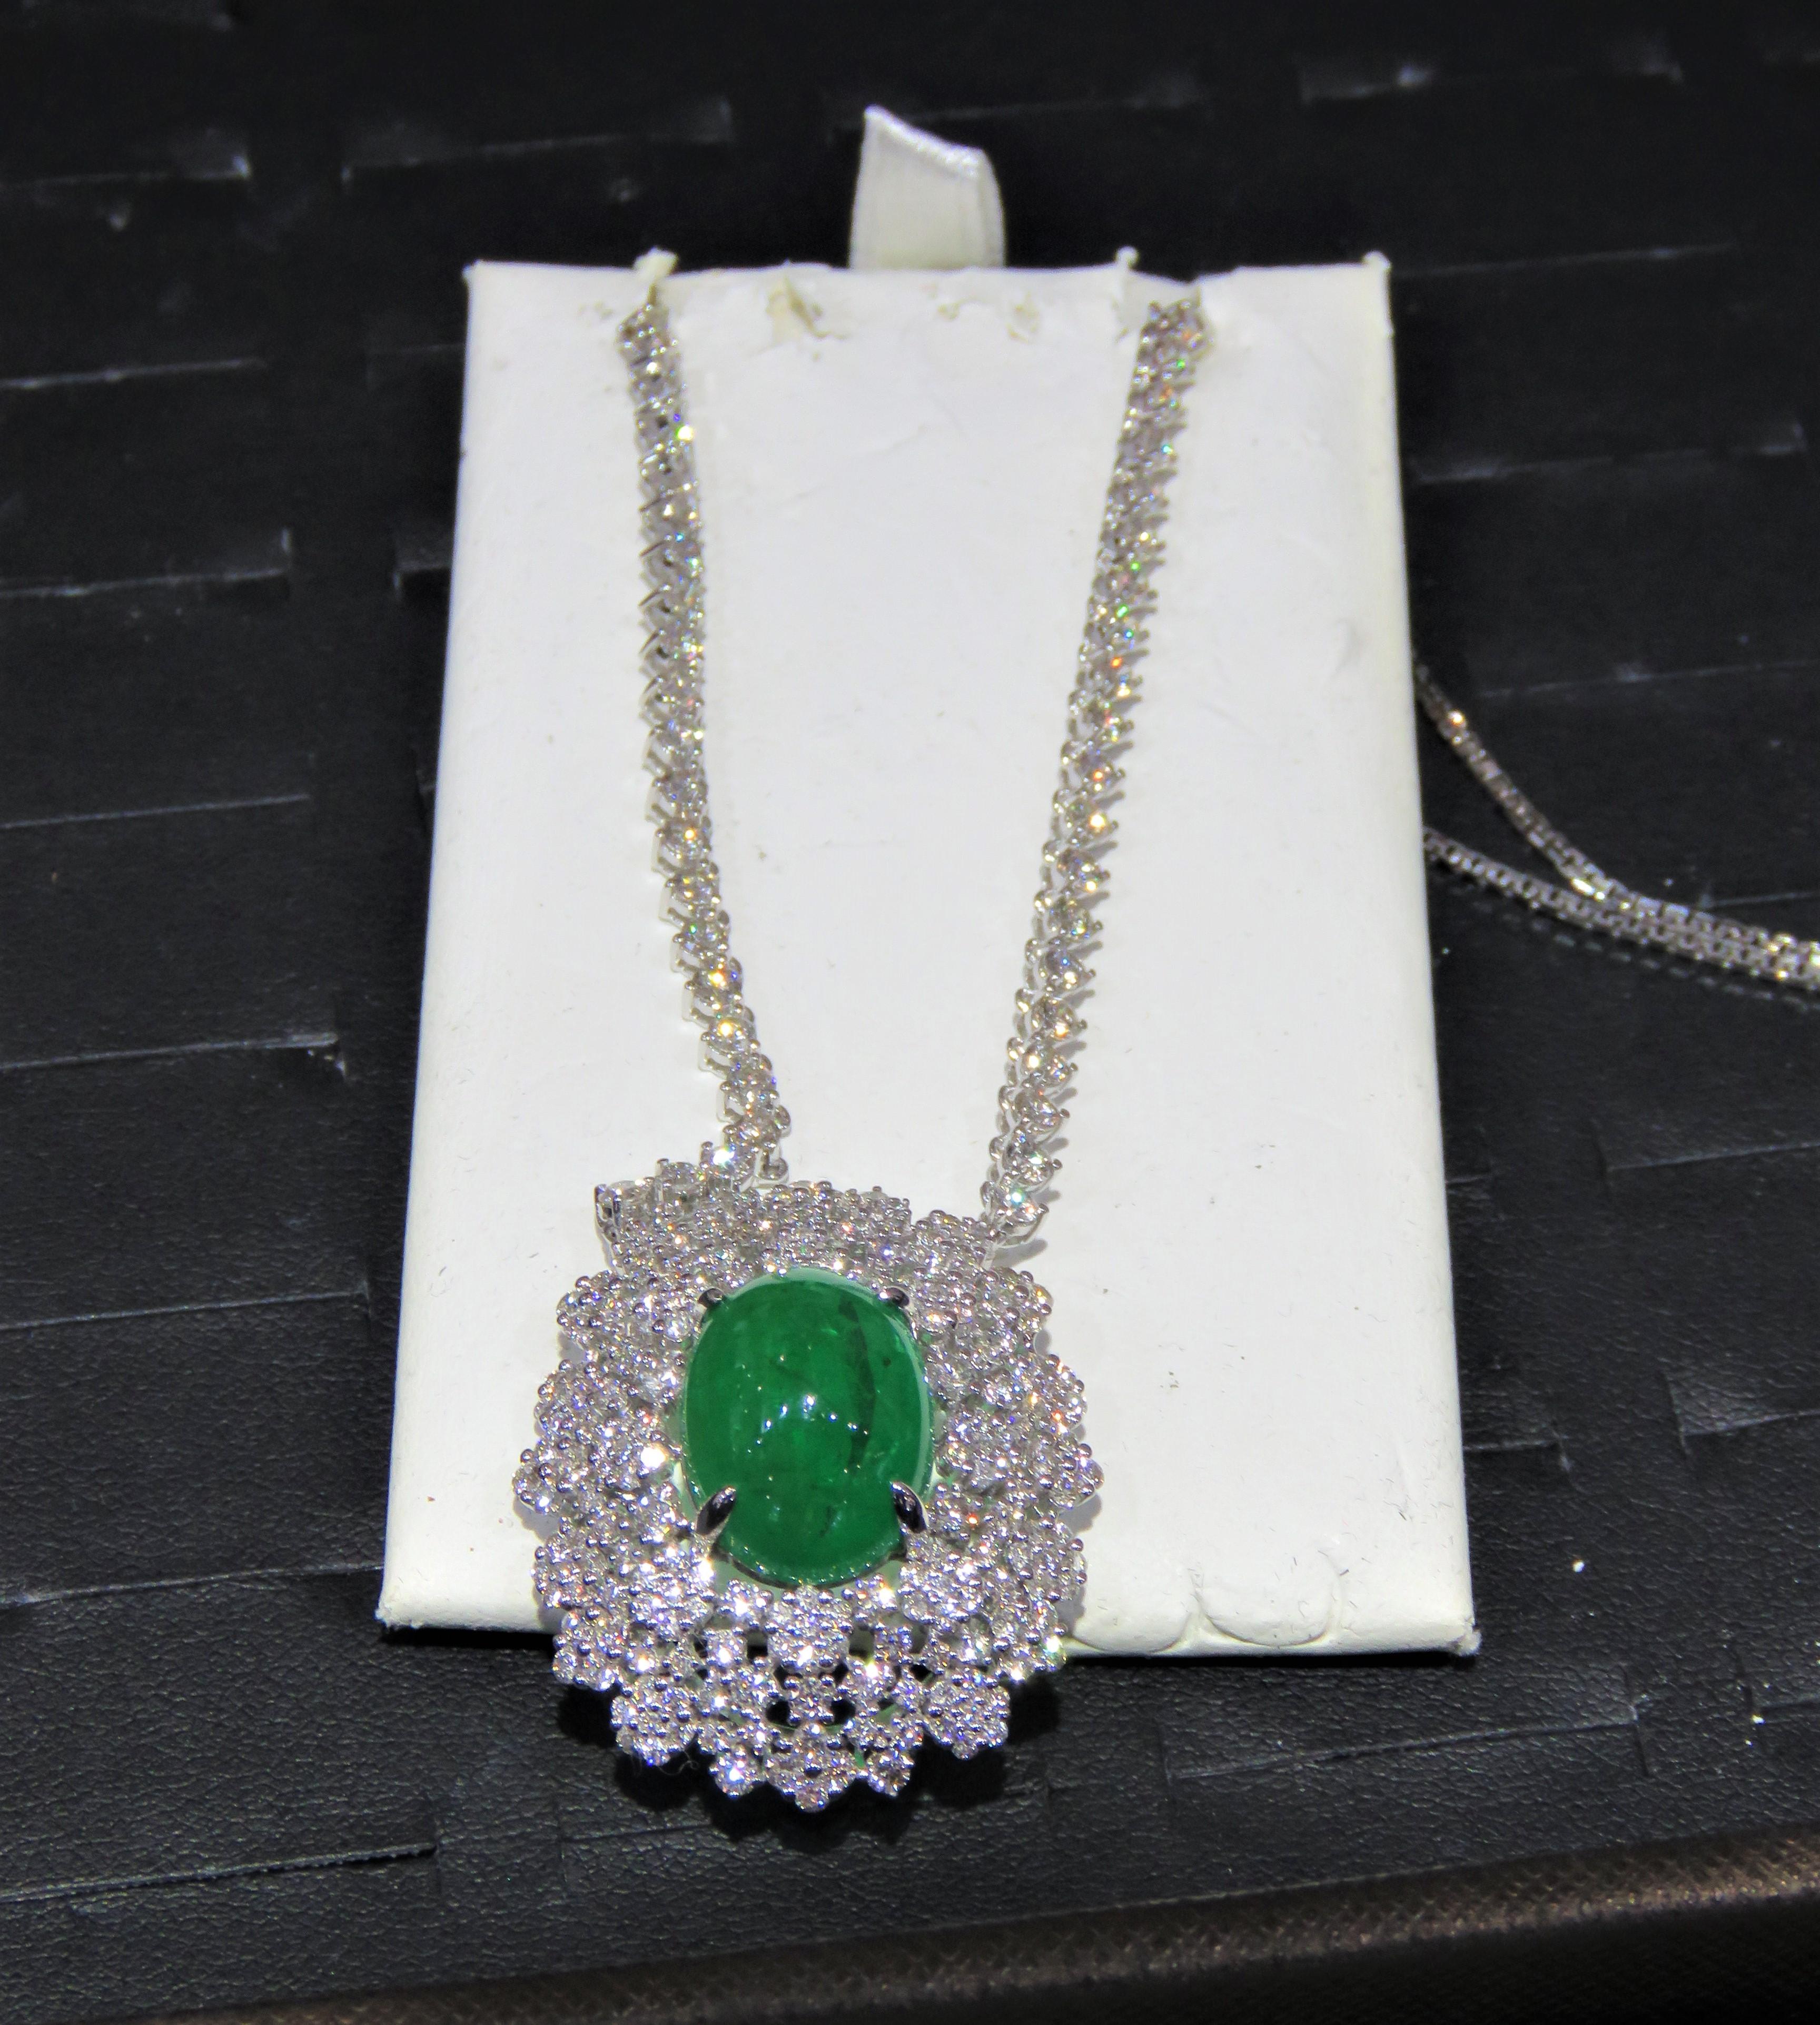 The Following Item we are offering is this Rare Important Radiant 18KT Gold Gorgeous and Sparkling Magnificent Fancy Emerald and Diamond Necklace. Necklace features approx 16CTS of a Beautiful Fancy Cabachon Green Emerald and Glittering Diamonds!!!